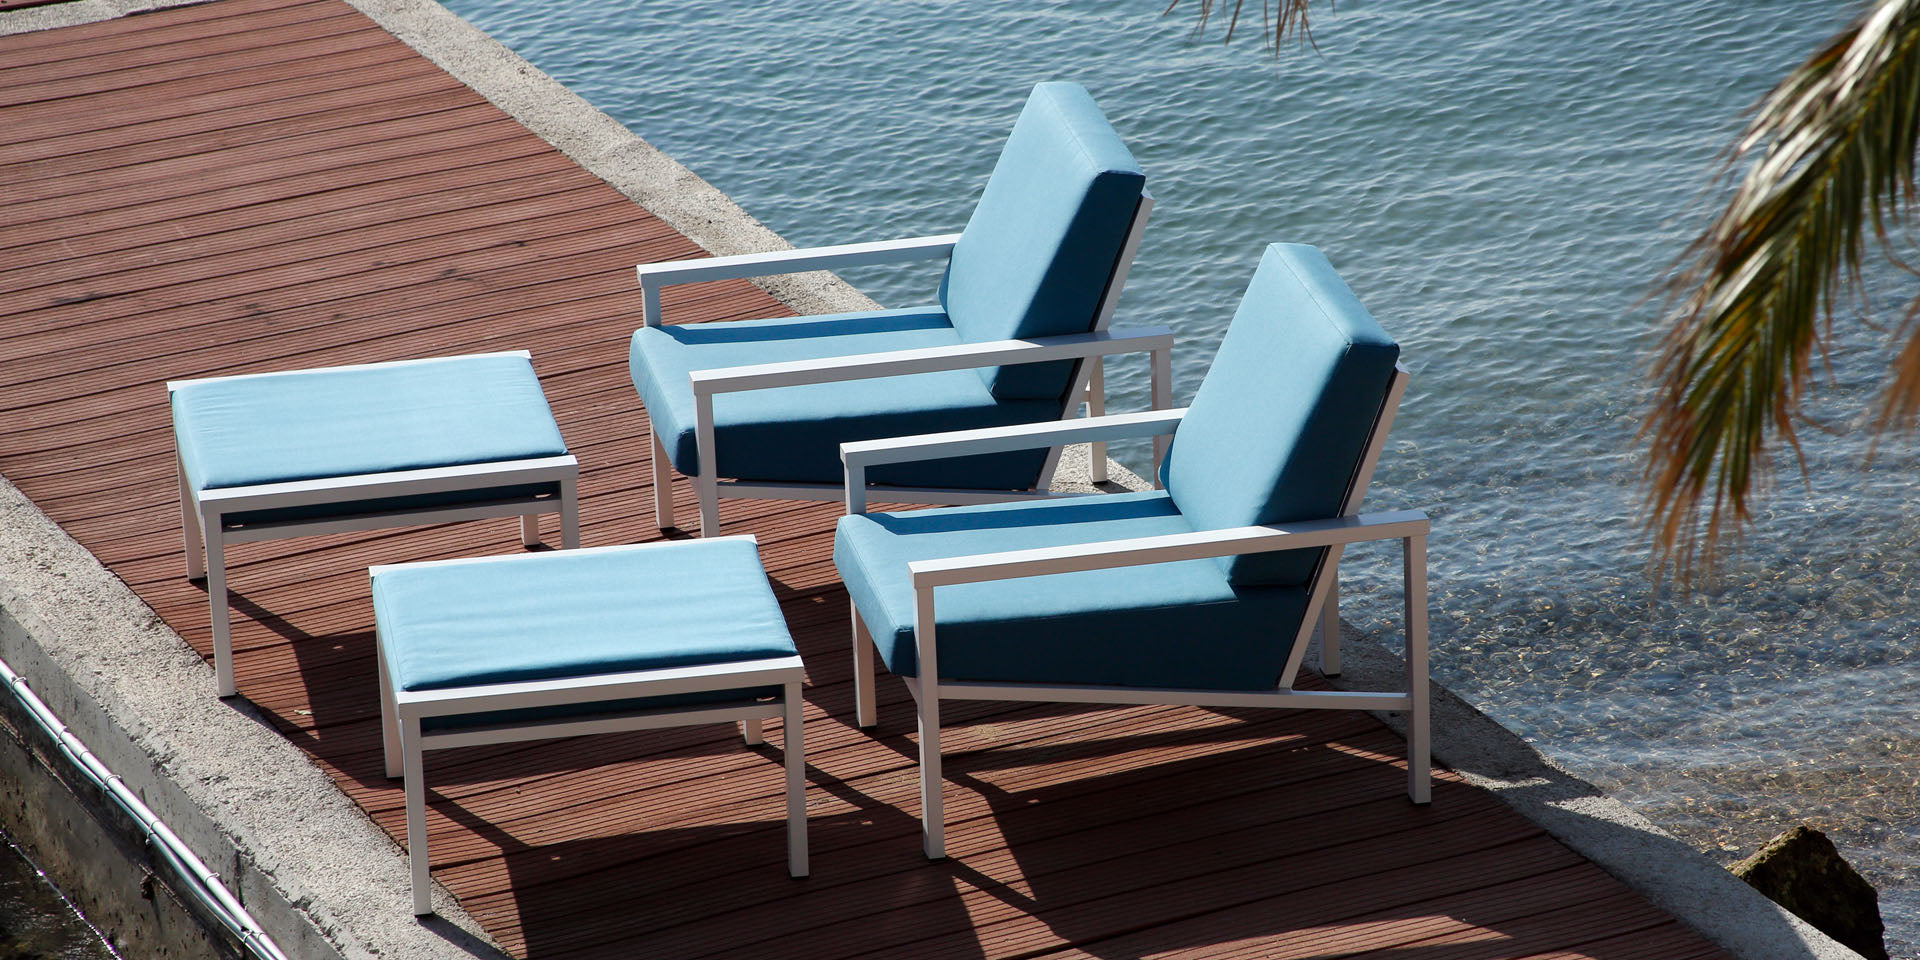 Equinox Occasional Lounger - Powder coated